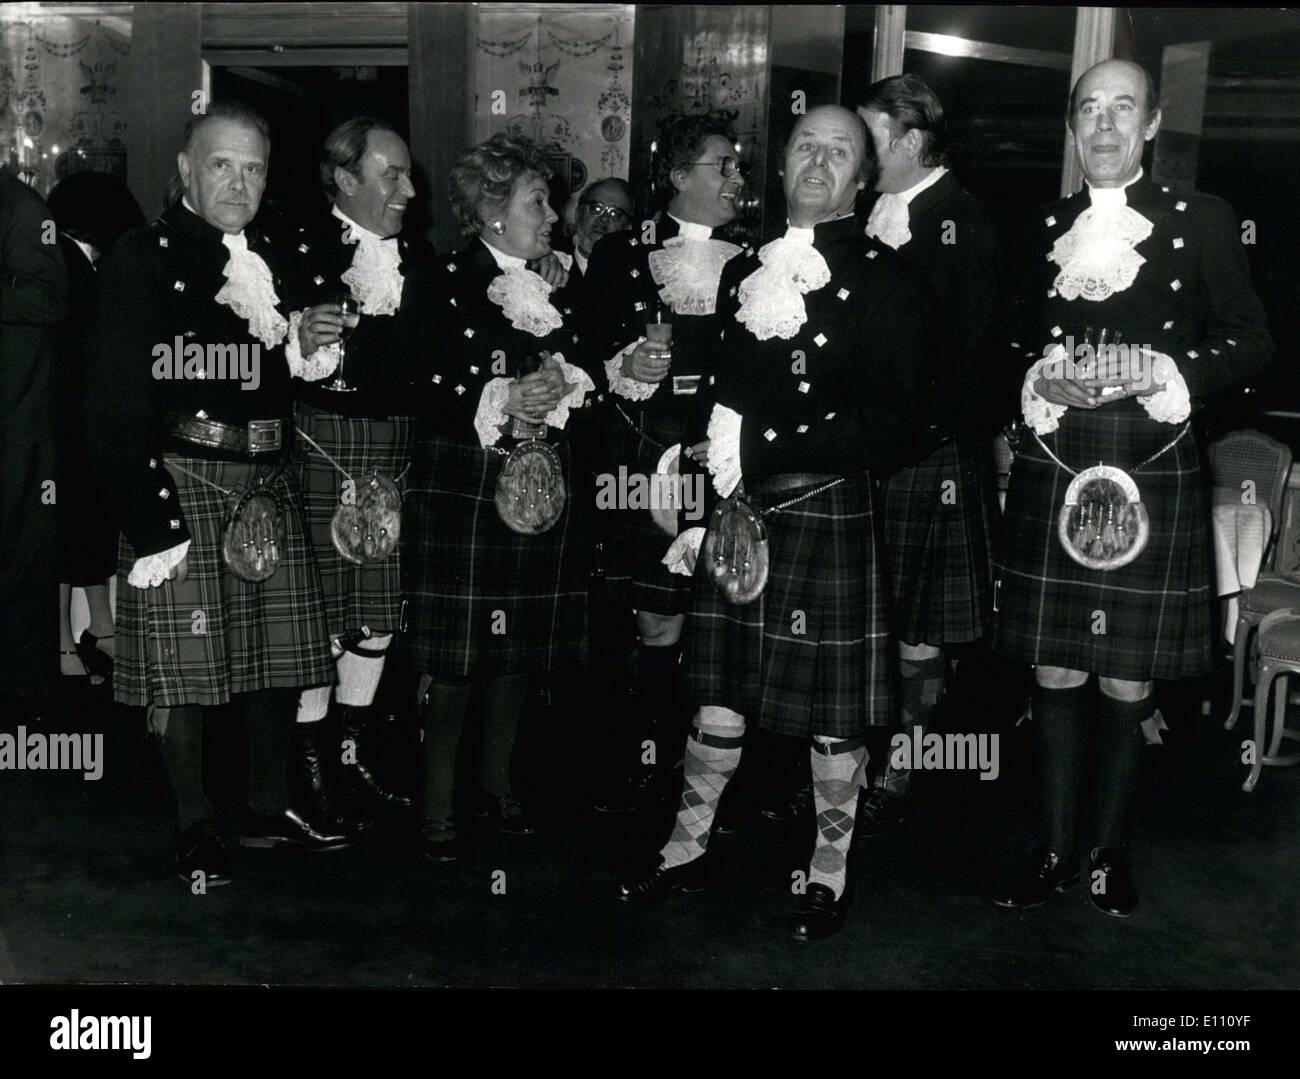 Dec. 12, 1974 - Baron Philippe de Rothschild won the prize this year. Kleber Haedens and Claude Terrail are sharing the ''Glenfiddich Award'' this year, which is given to authors and journalists and writers whose writings deal with whiskey. Pictured: David Grant, Jean Didier, PJ Vaillard, Jacques Baudouin, Robert Courtine, Paul Vincent, & Anne-Marie Carriere. Stock Photo